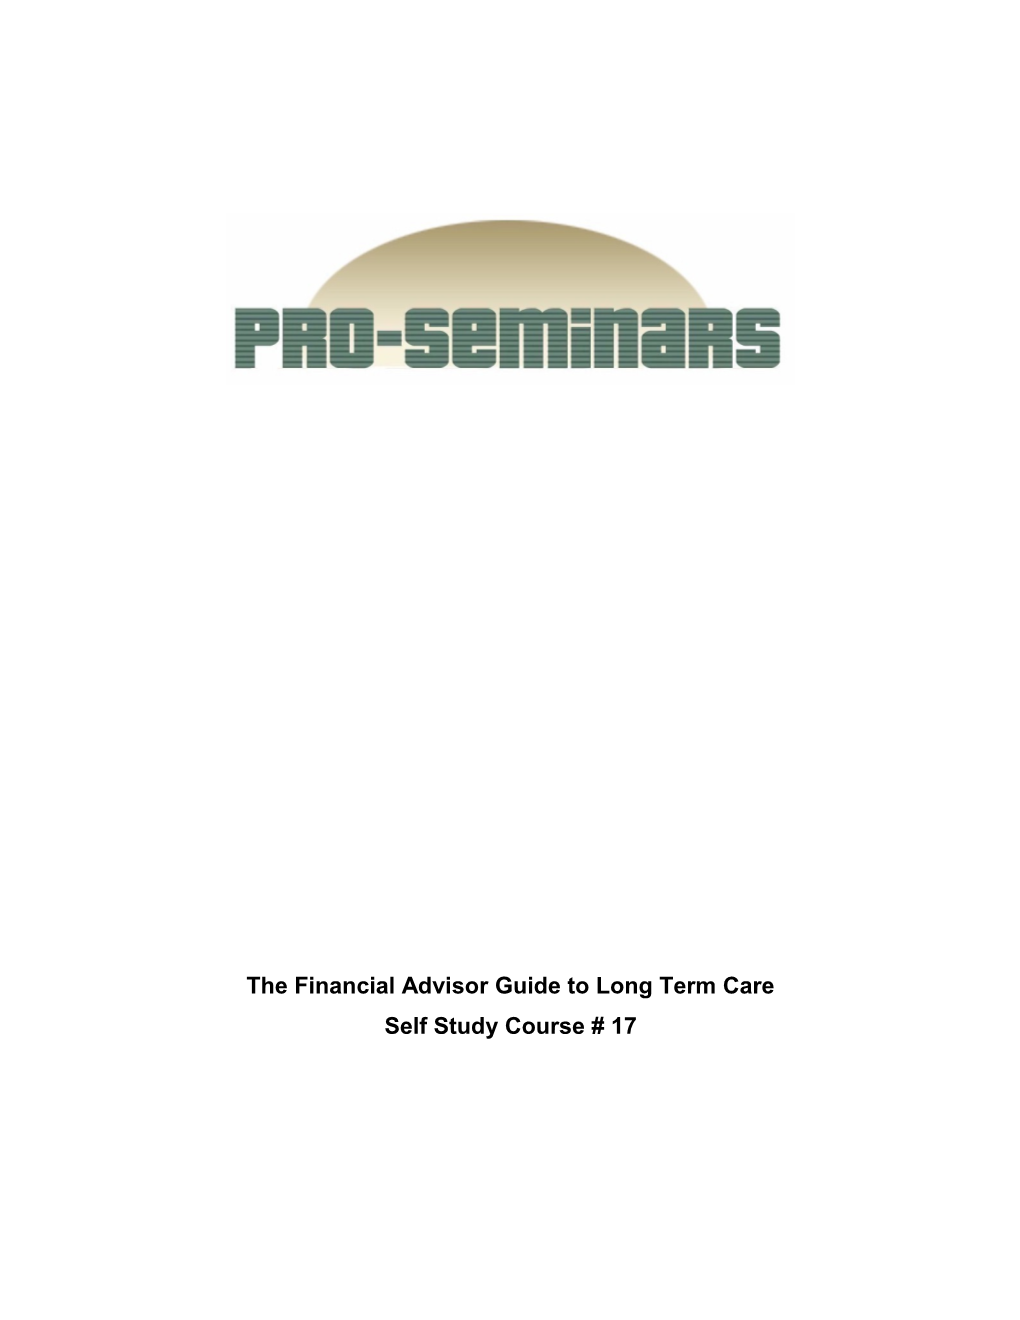 The Financial Advisor Guide to Long Term Care